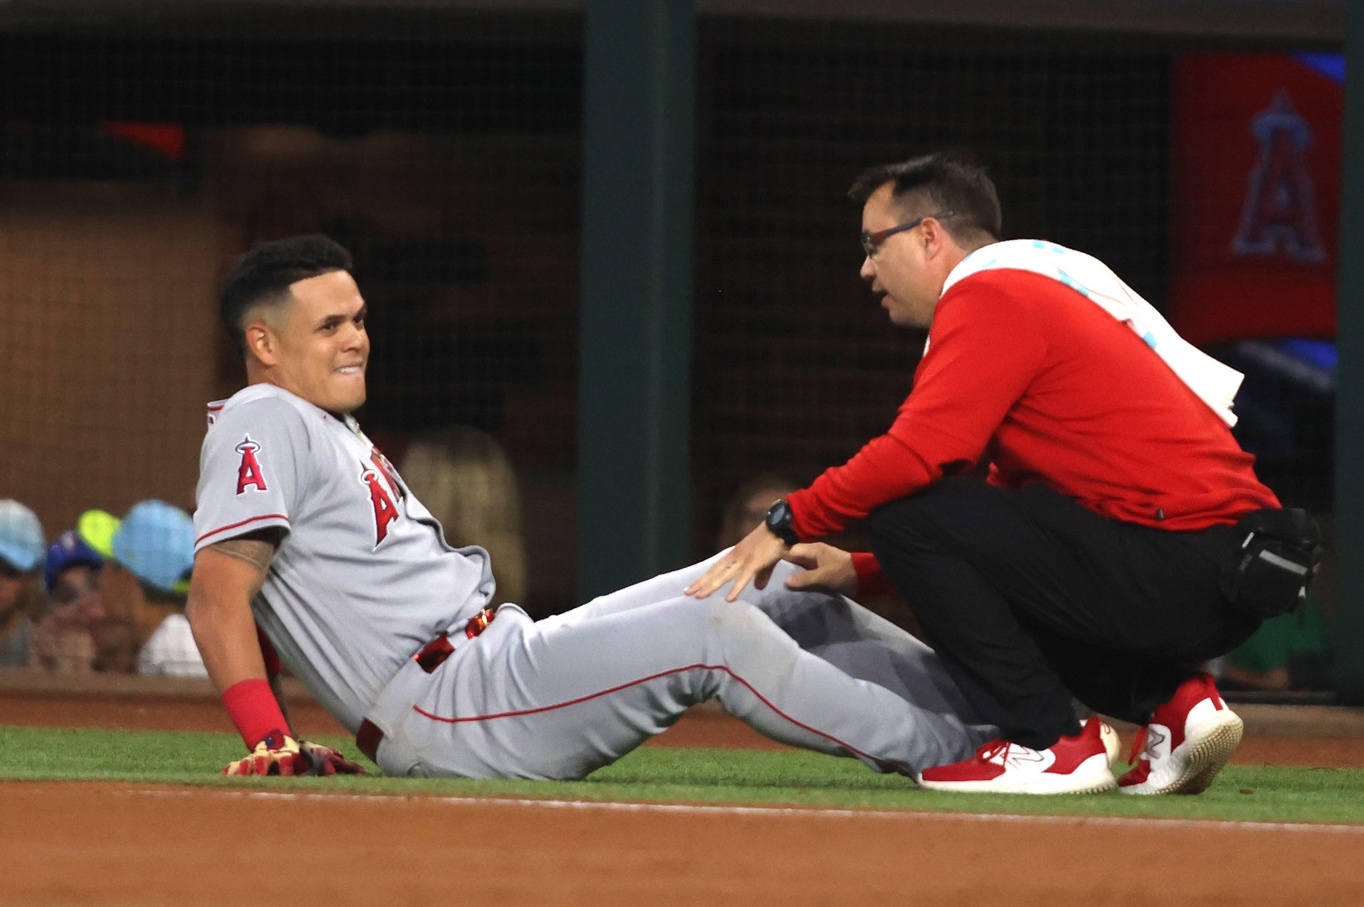 Angels' Gio Urshela likely out for season with broken pelvis - ESPN